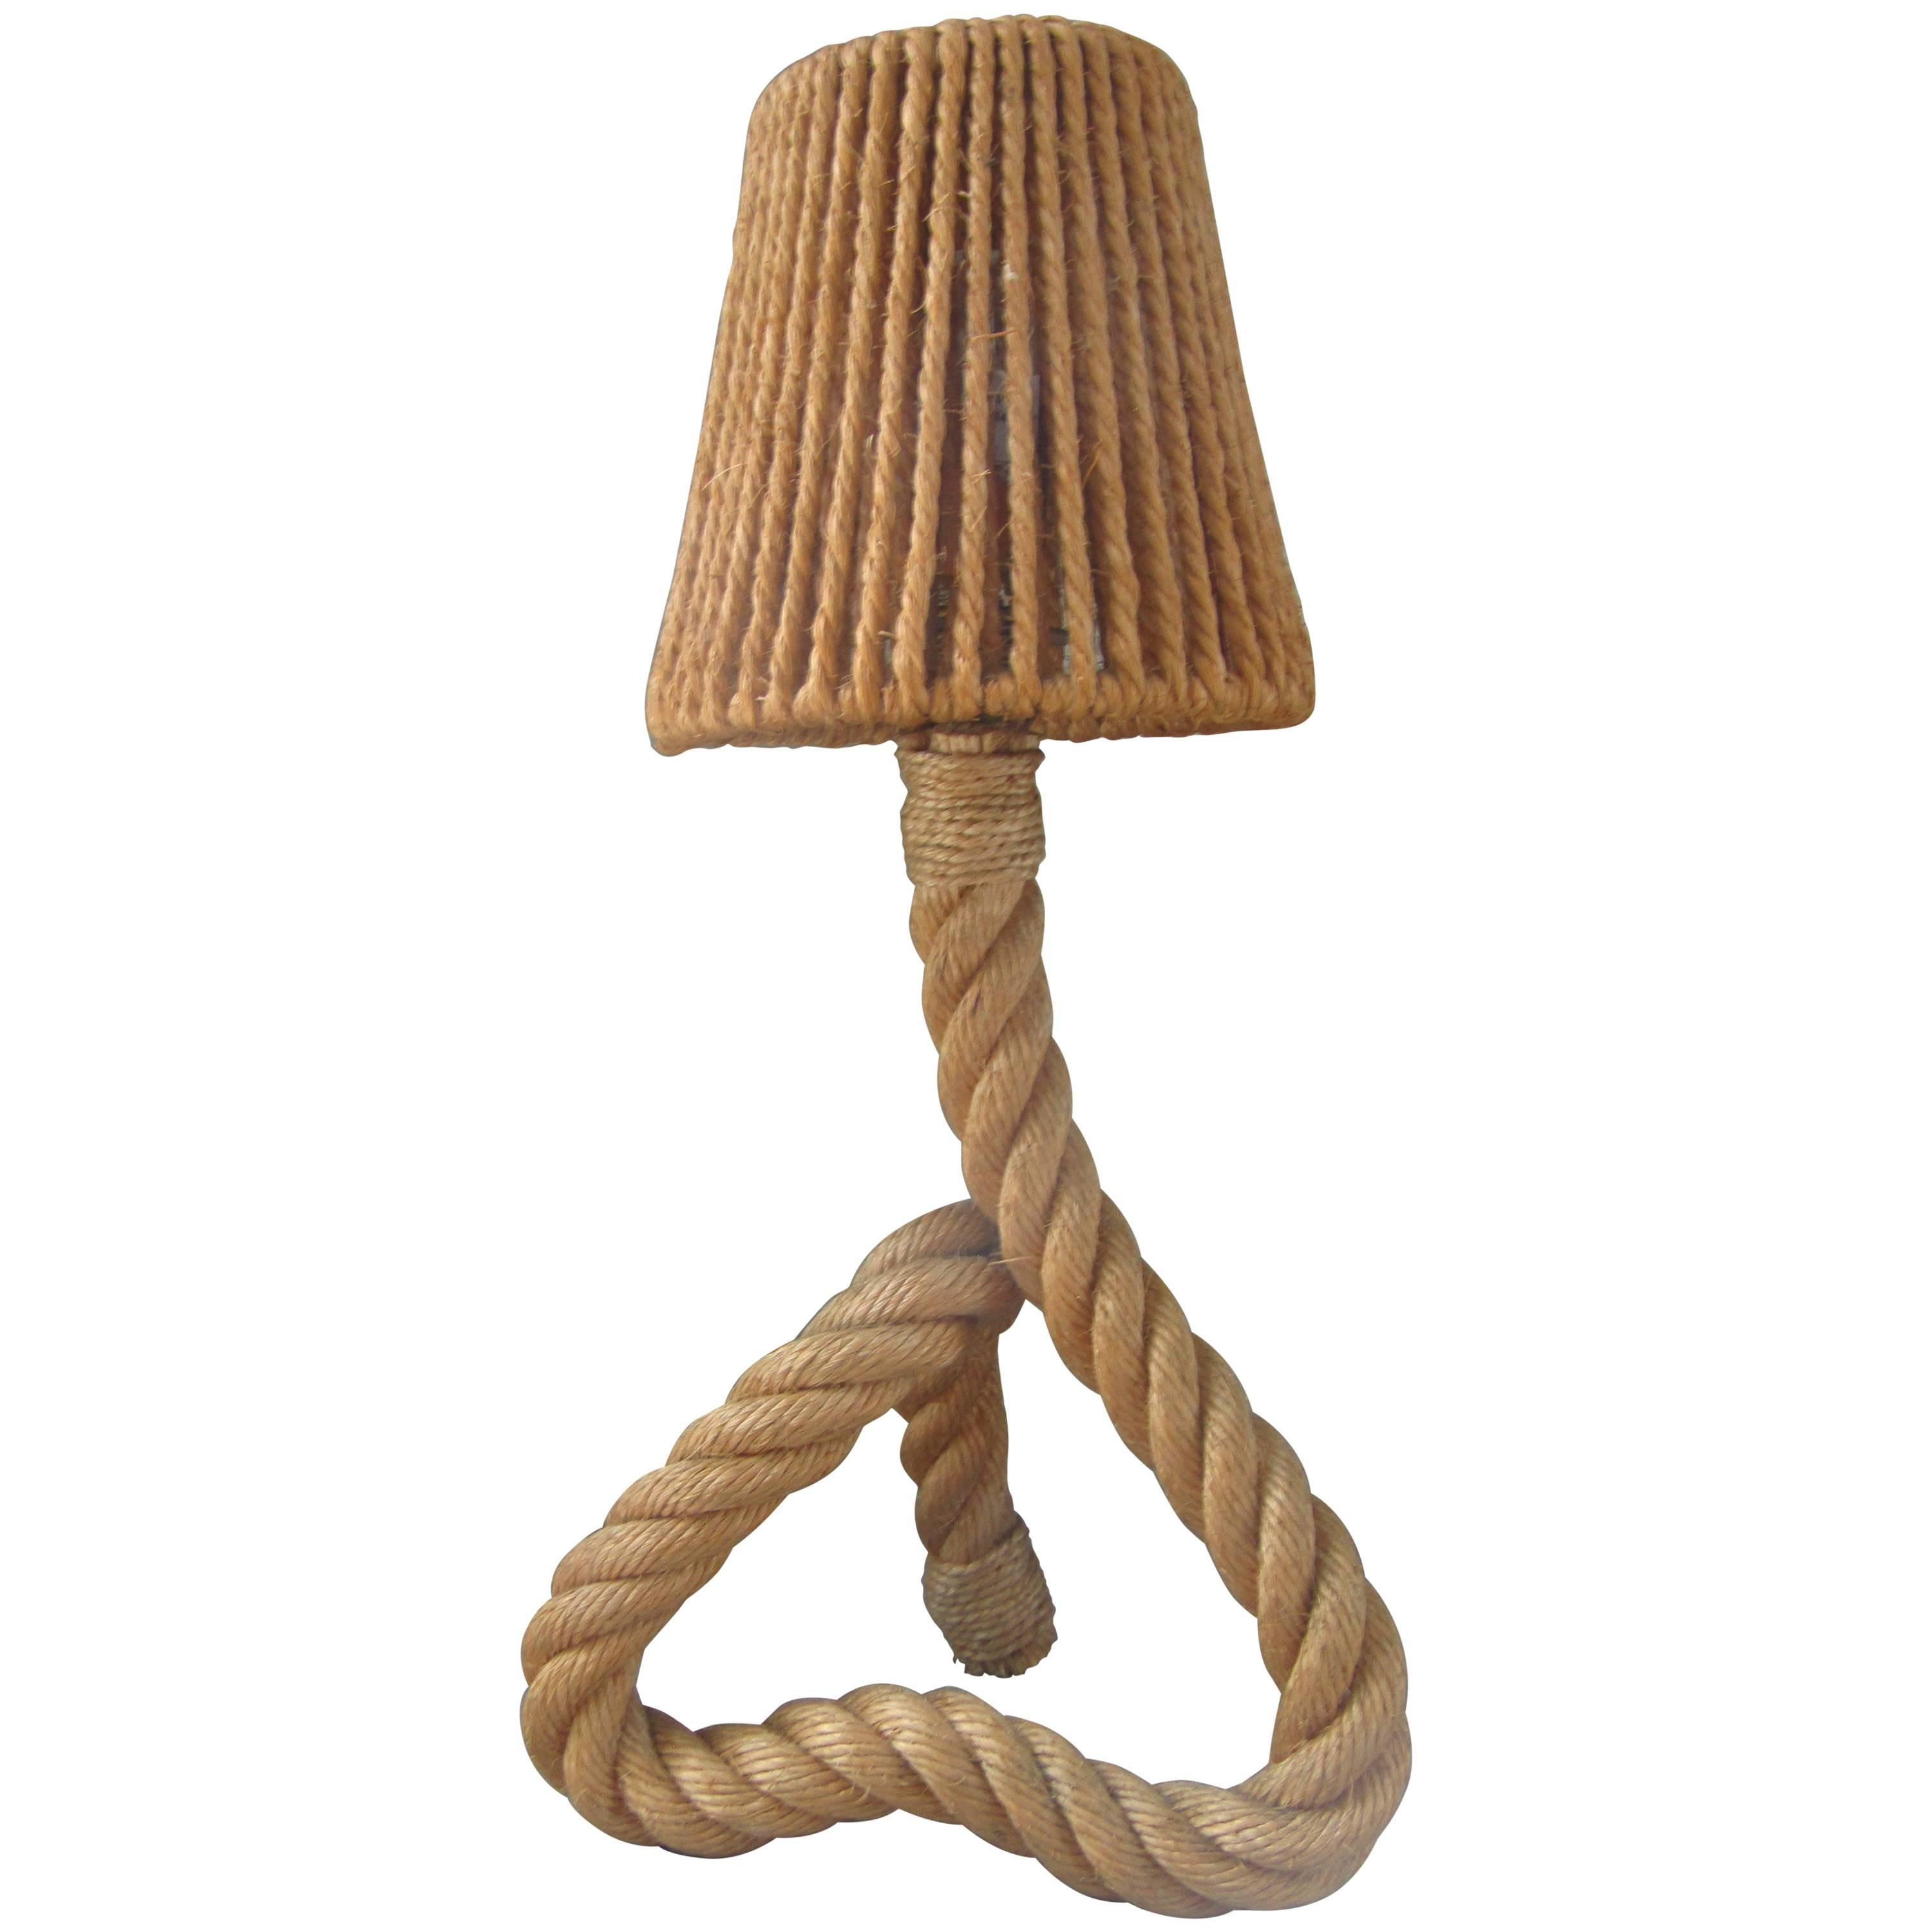 Midcentury Rope Table Desk Lamp Audoux and Minet, France, 1960s